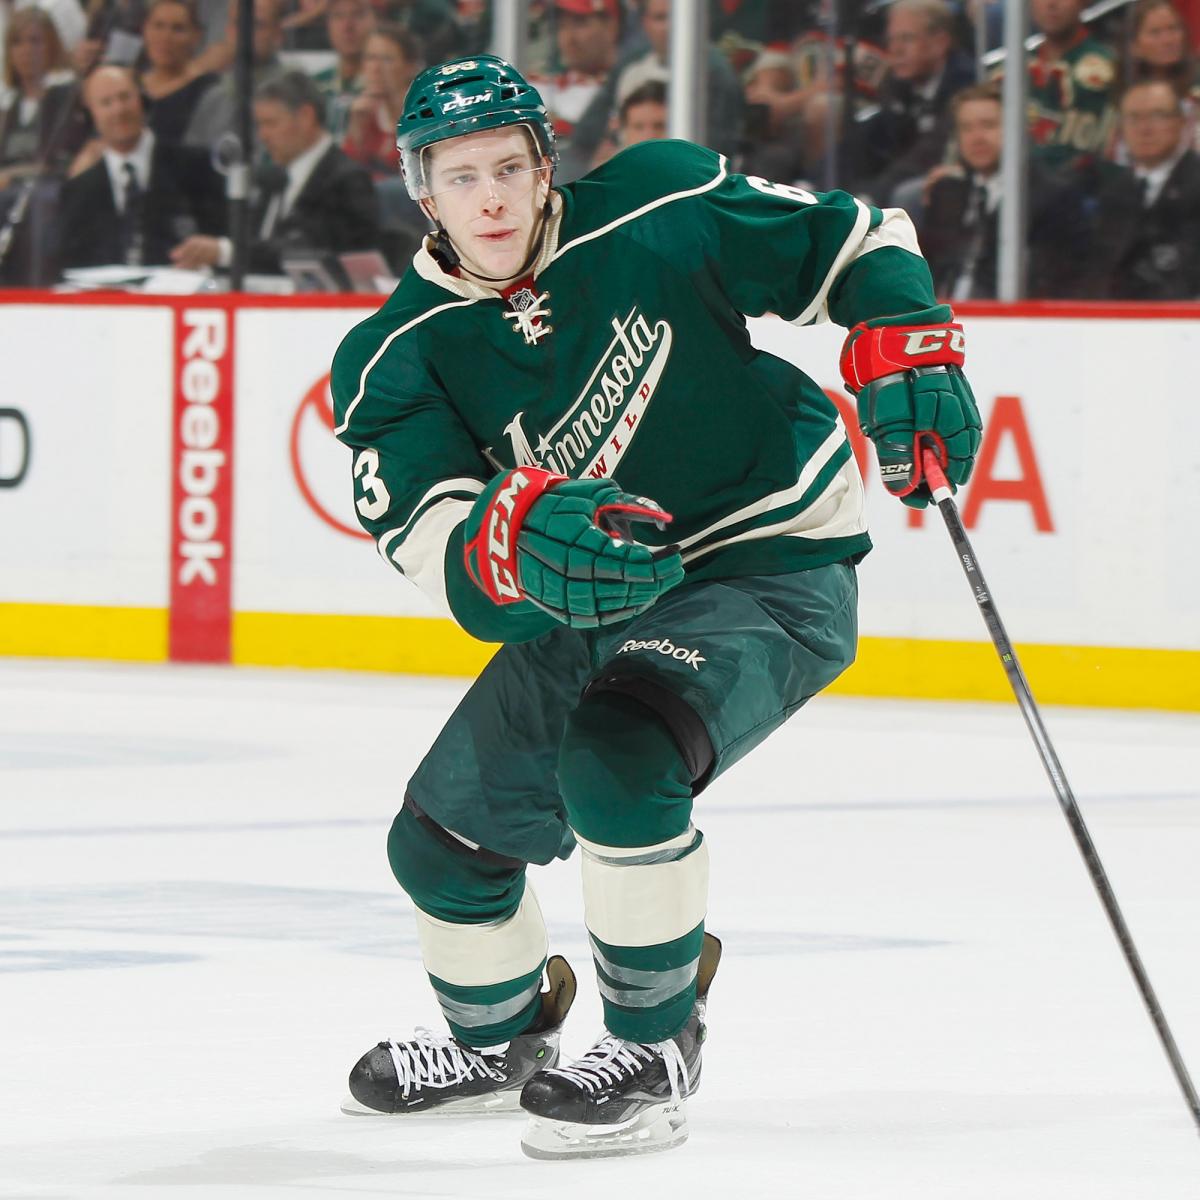 Charlie Coyle's biggest fans? His grandmothers